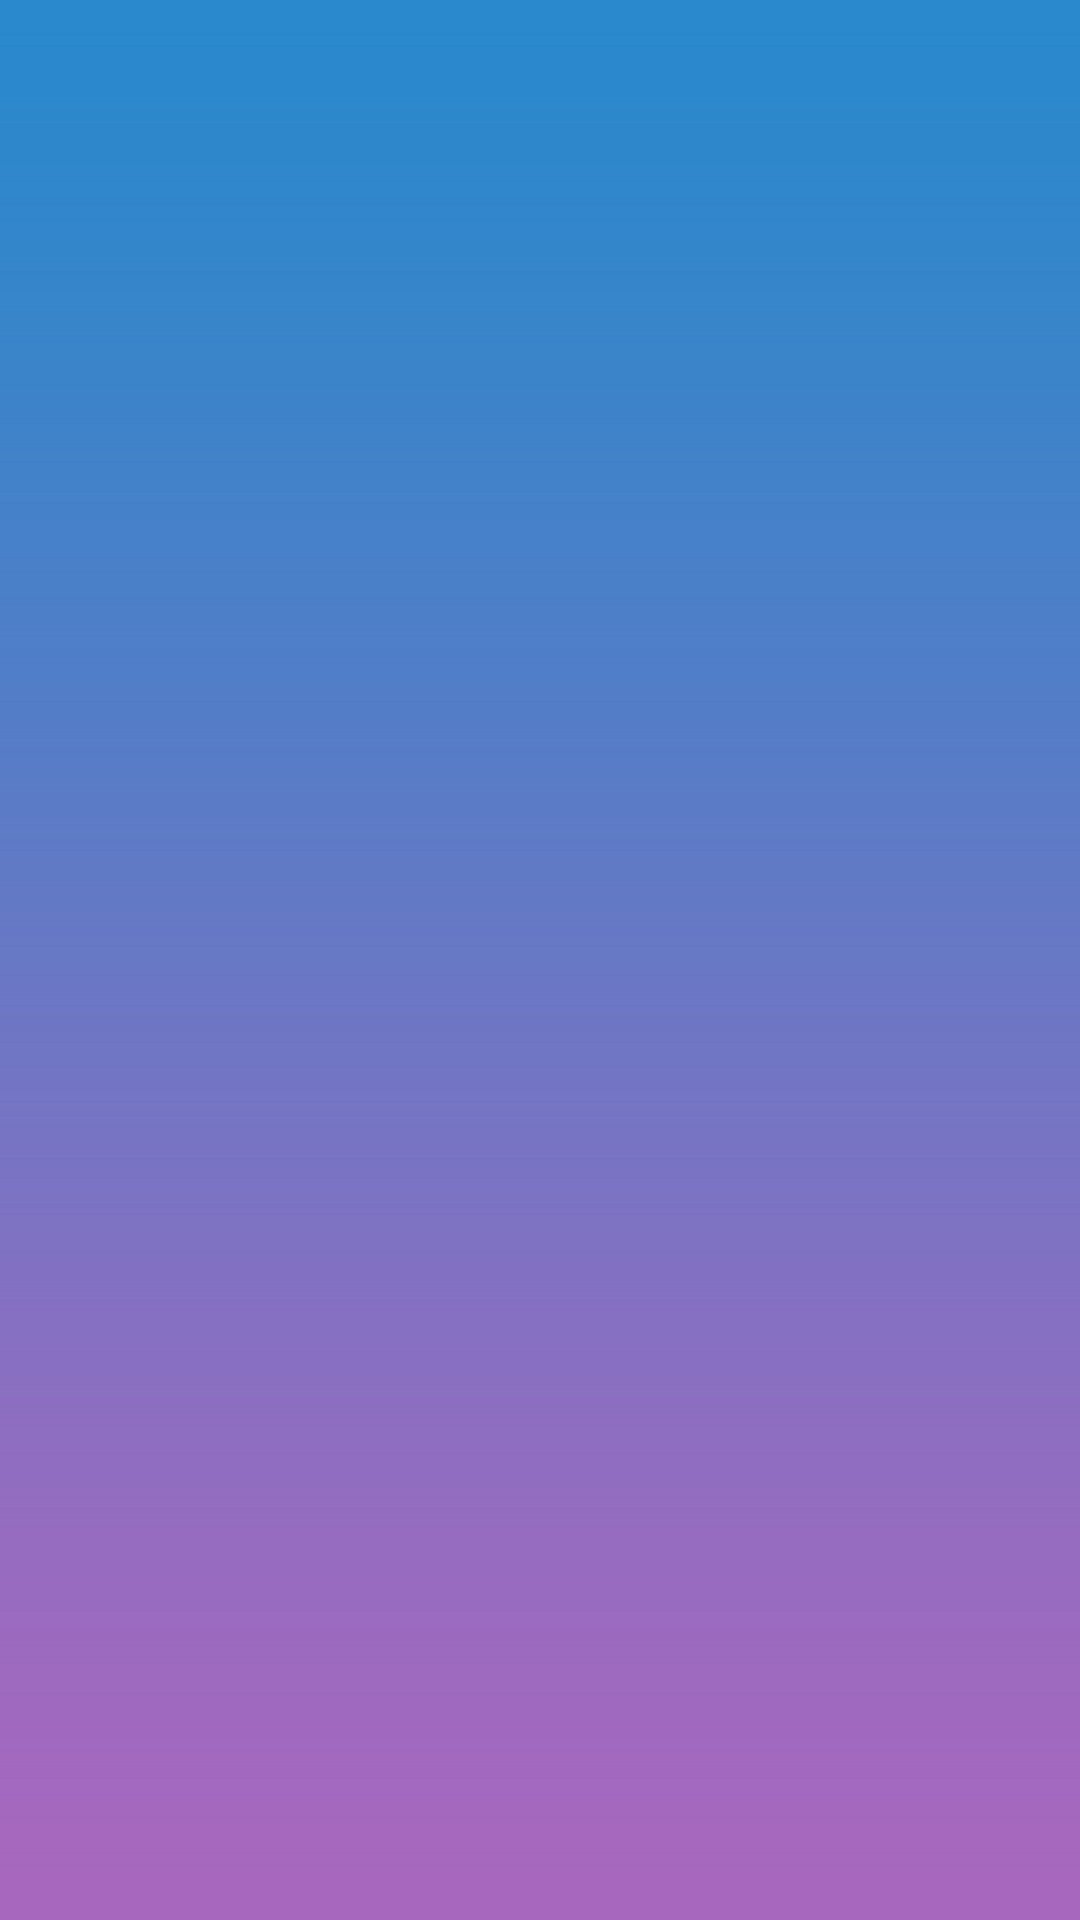 Gradient IPhone X Wallpaper With High Resolution Pixel